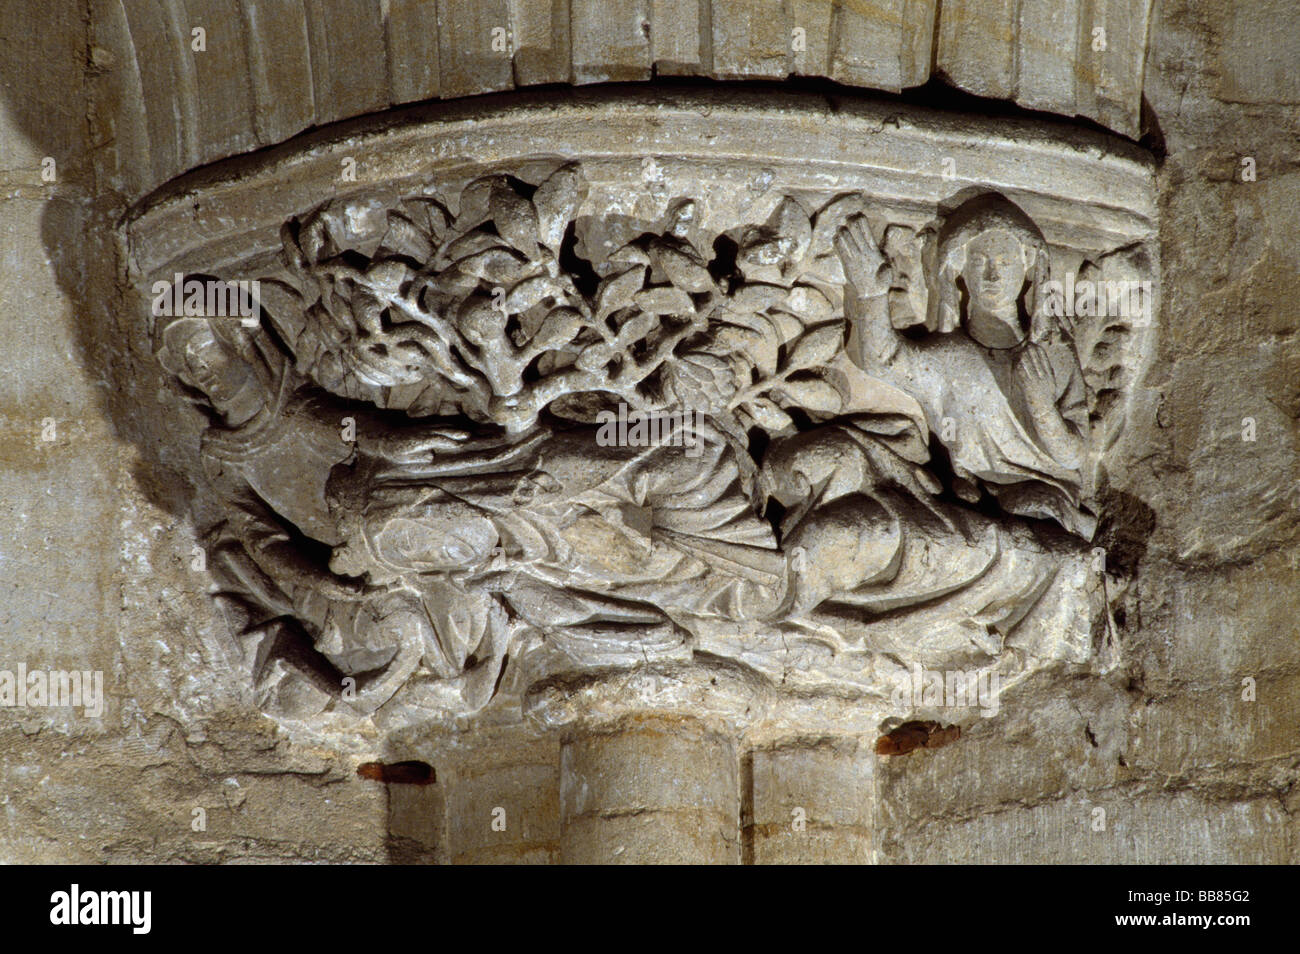 Ely Cathedral capital with floral pattern and figures Stock Photo